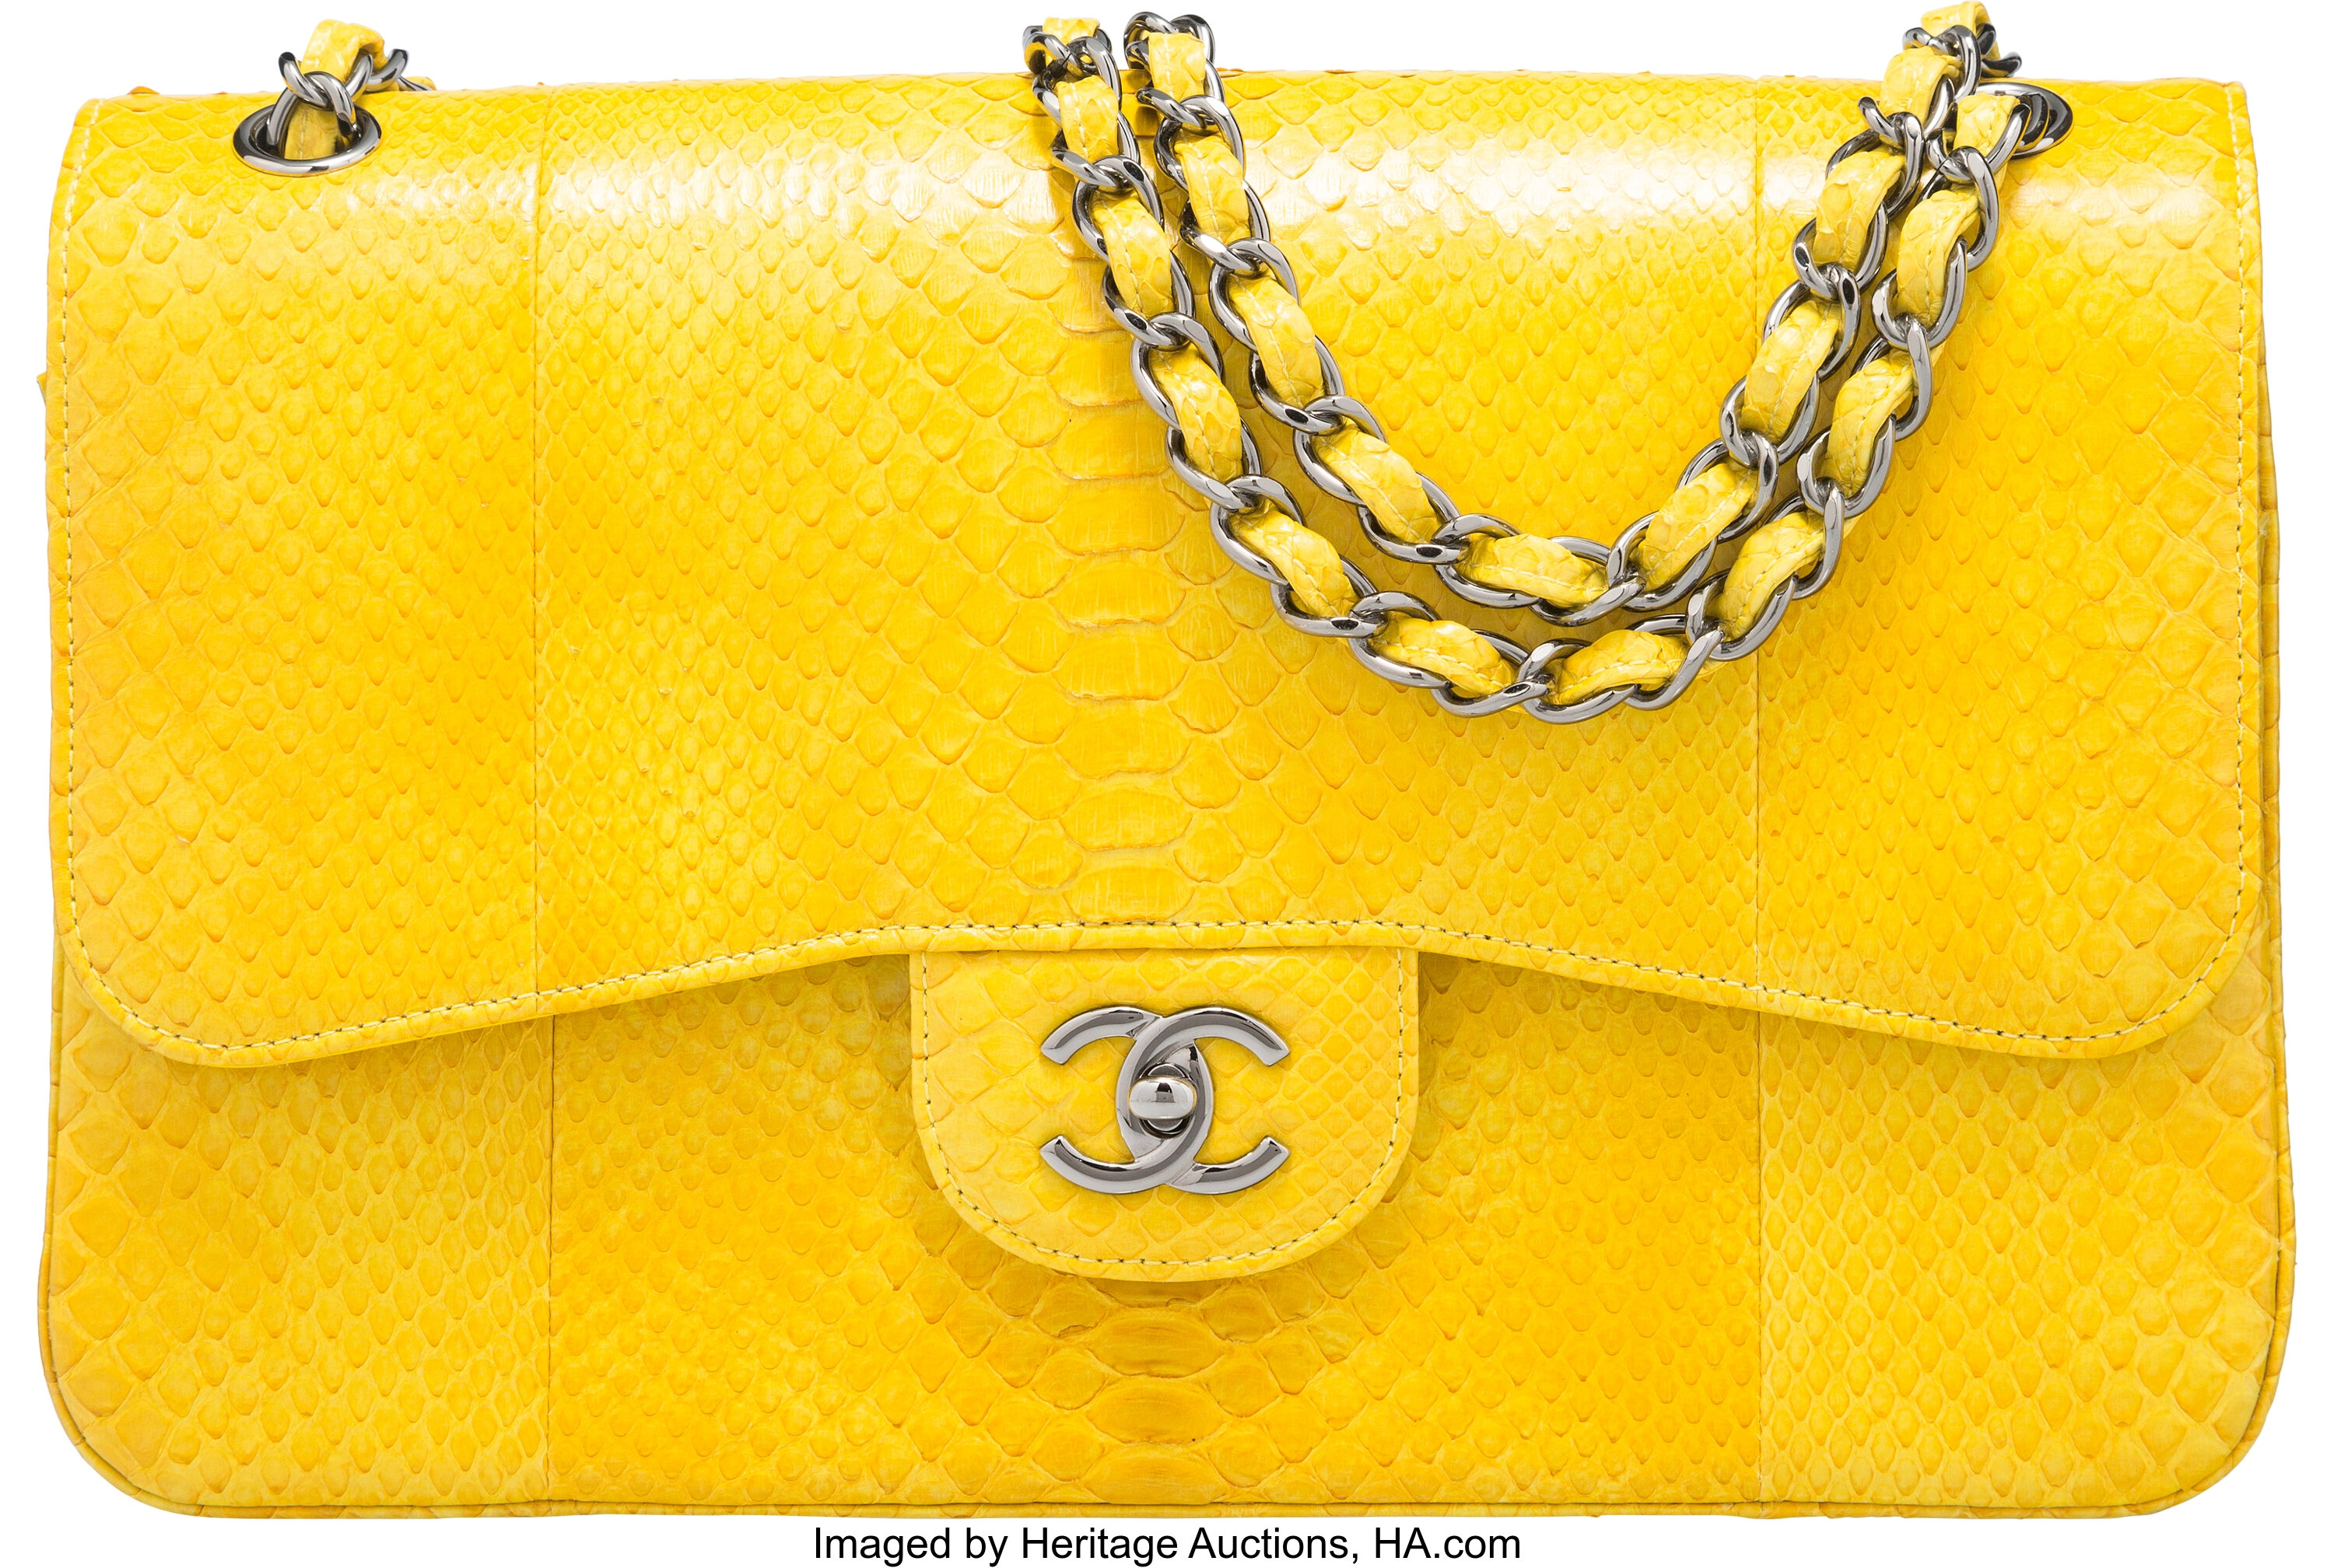 Sold at Auction: Chanel Classic Double Flap Gold Python Purse